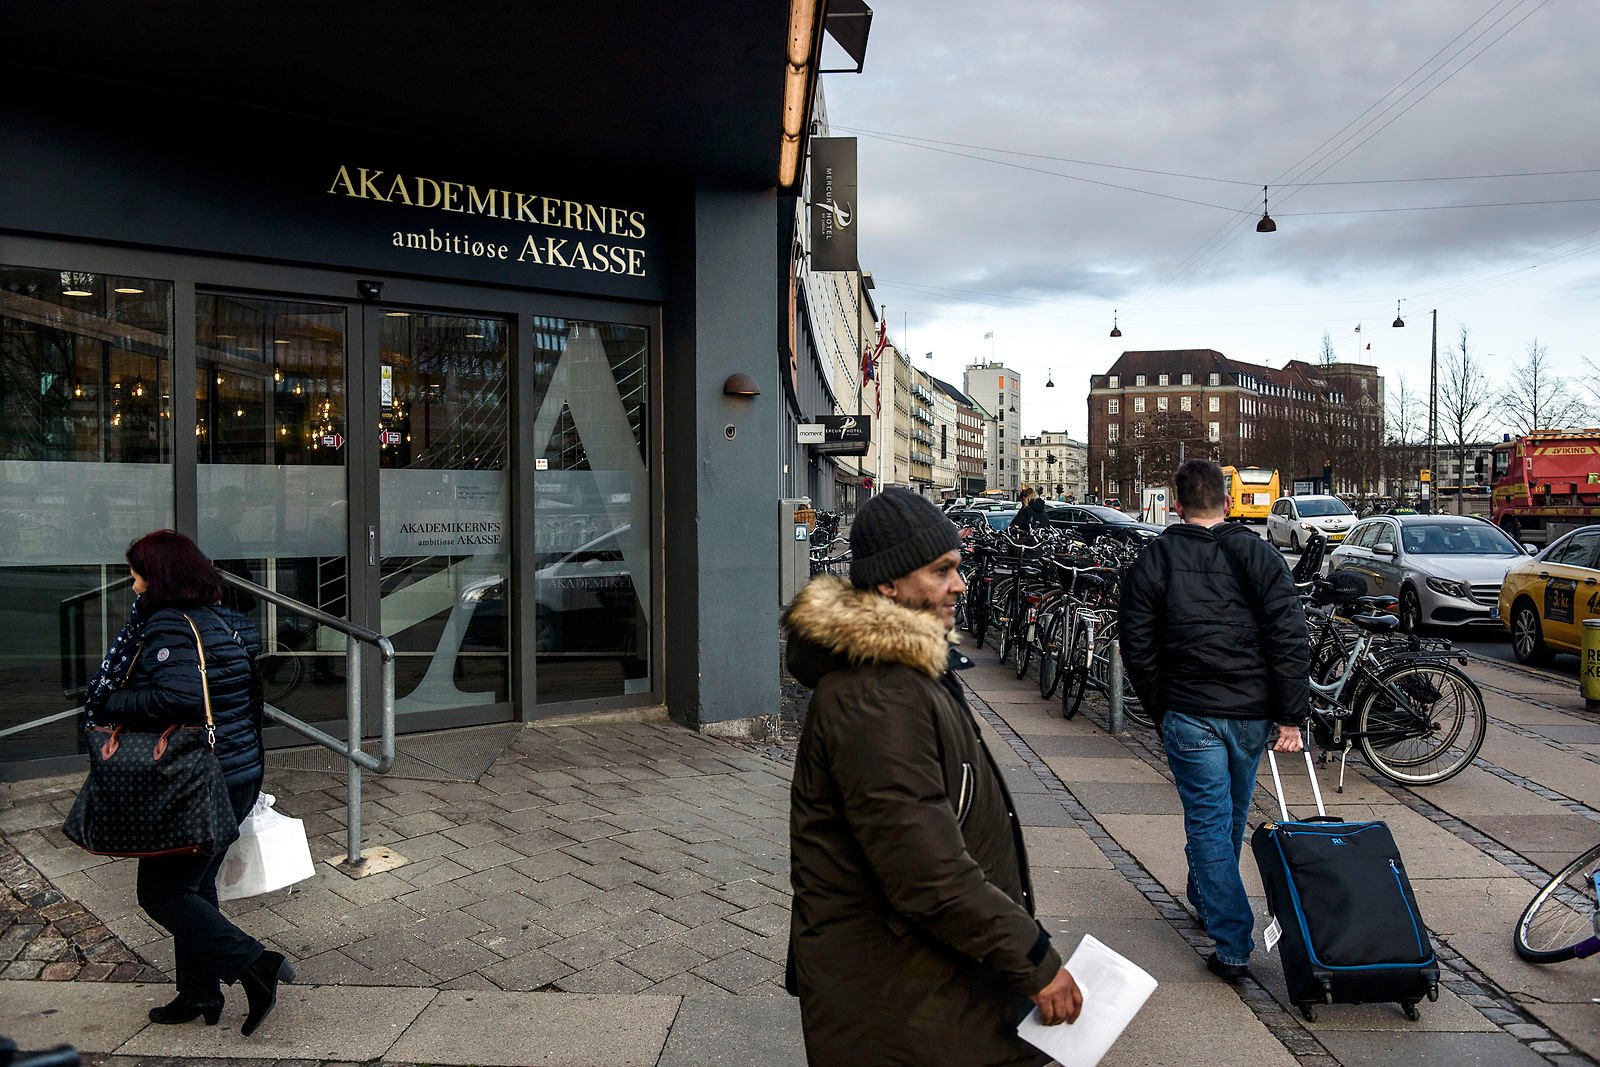 a-kasse:-everything-foreigners-in-denmark-need-to-know-about-unemployment-insurance